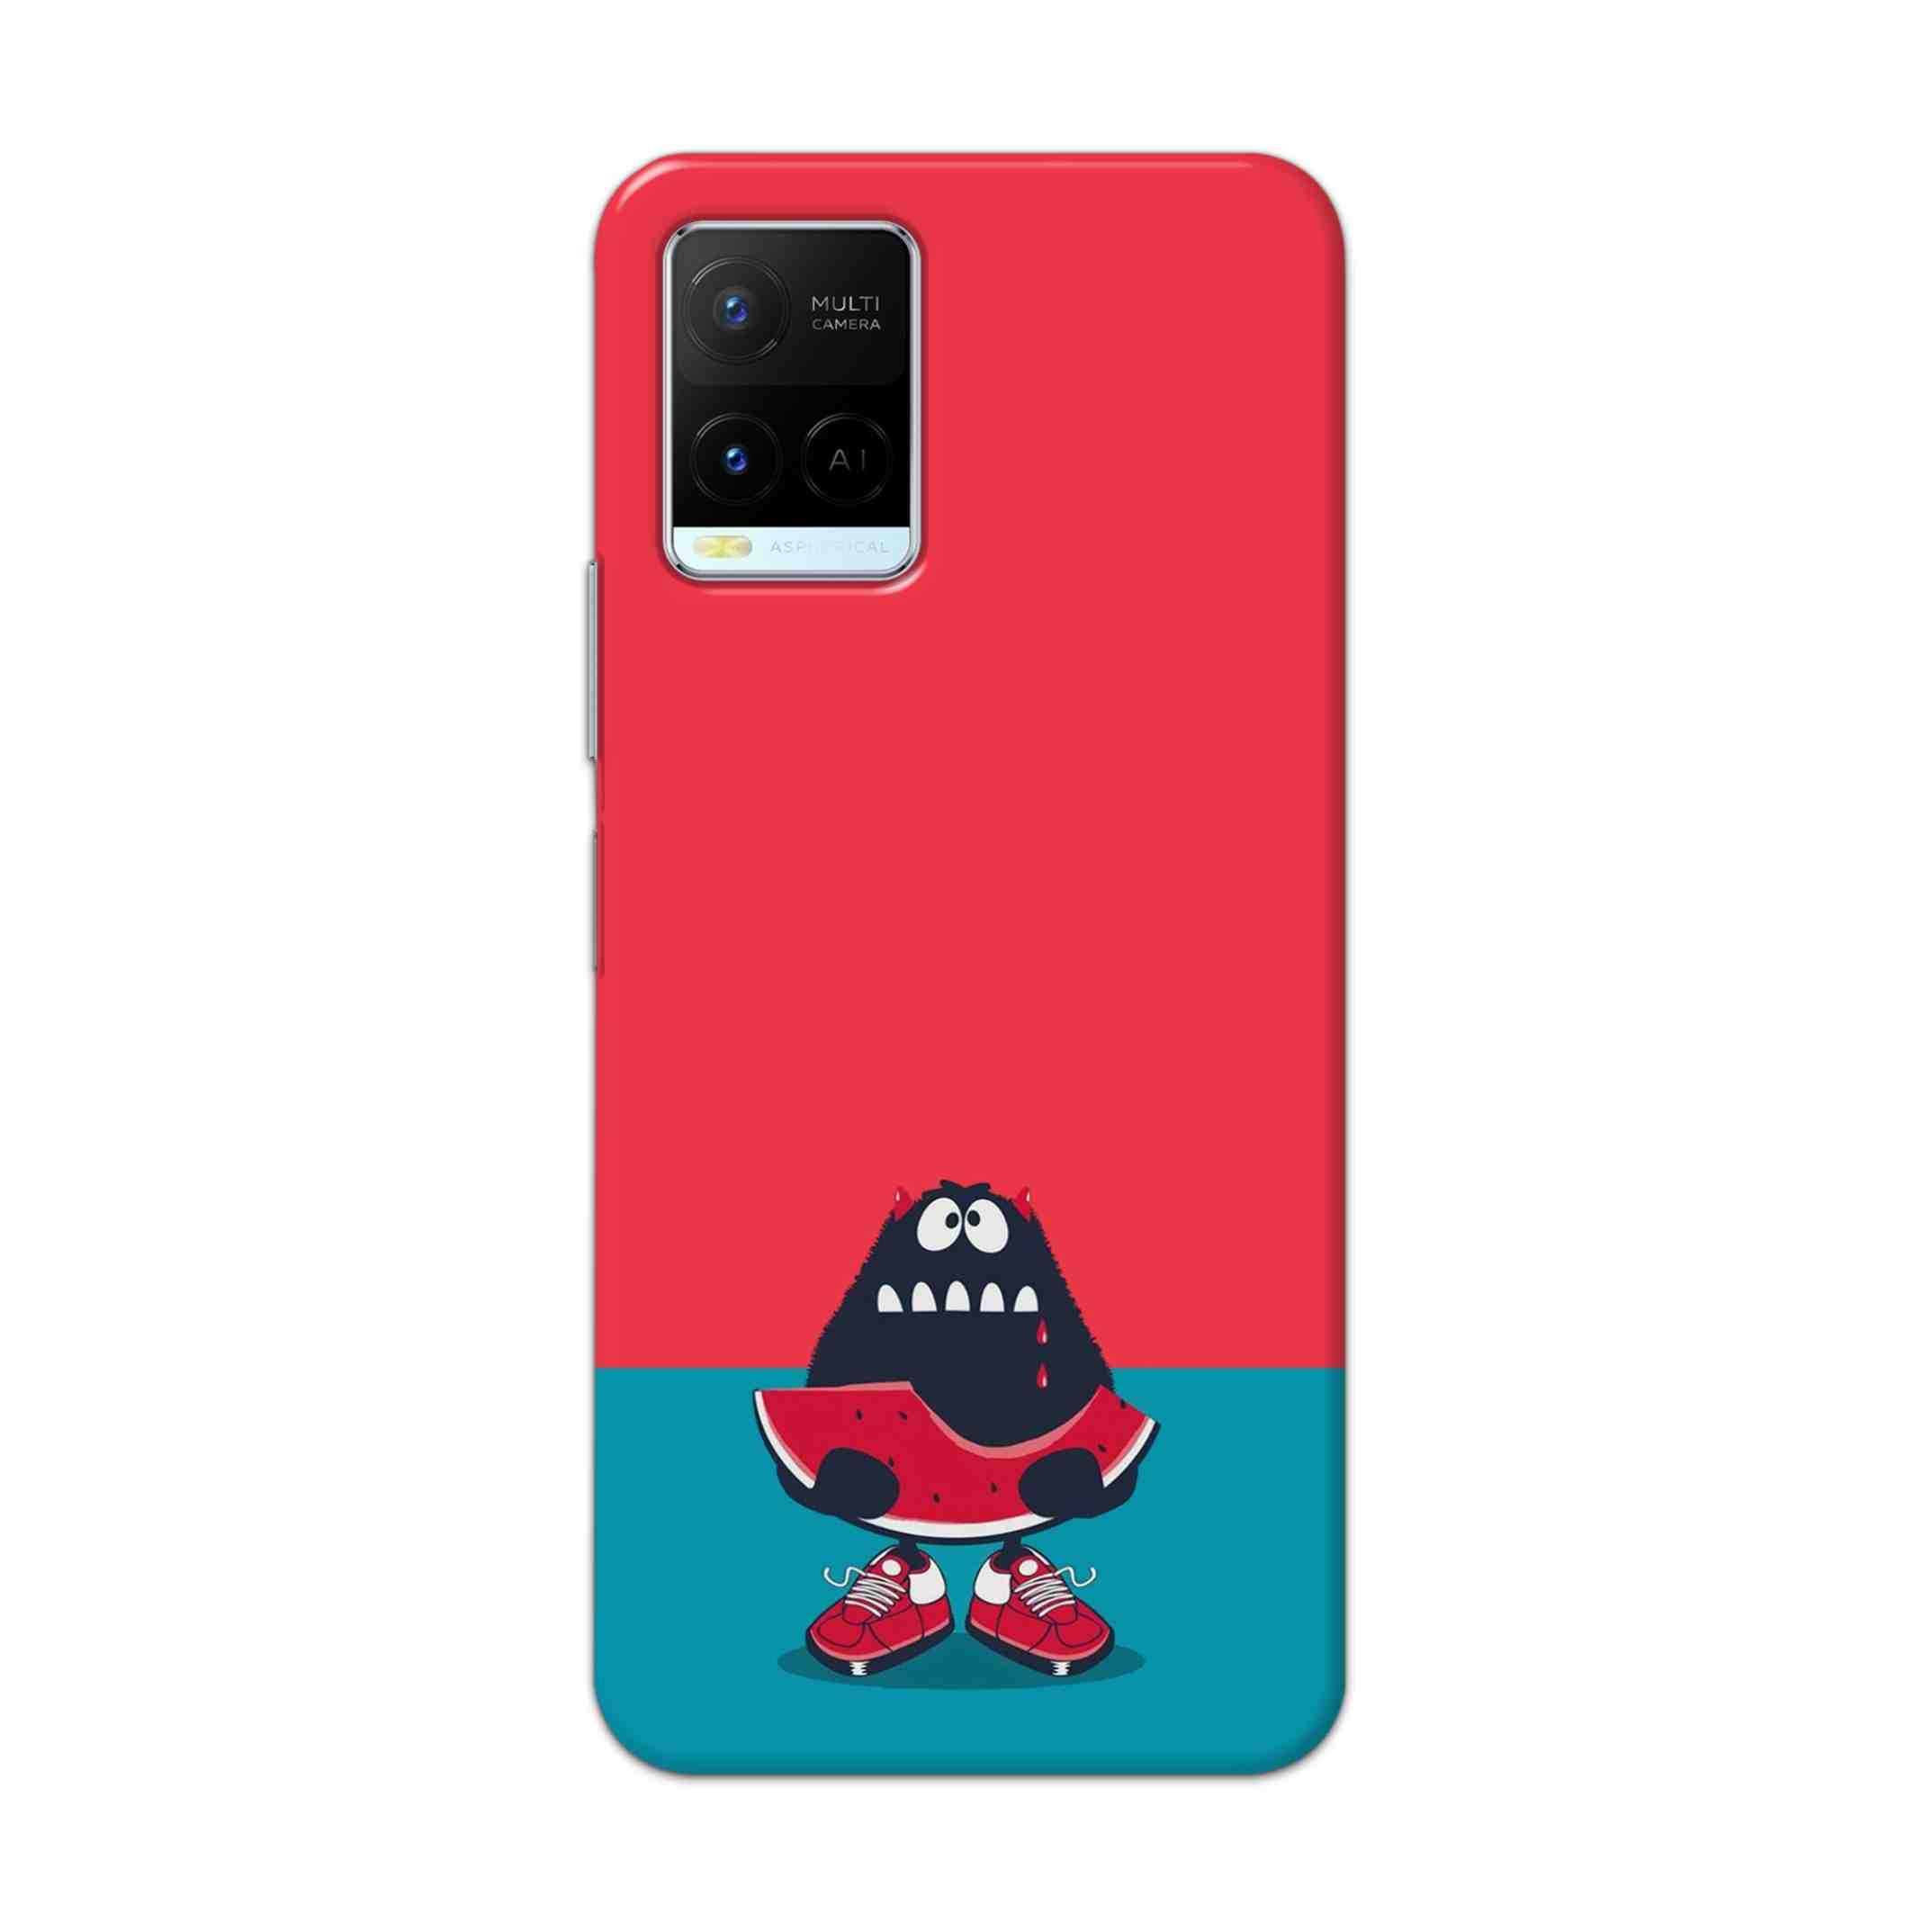 Buy Watermelon Hard Back Mobile Phone Case Cover For Vivo Y21 2021 Online